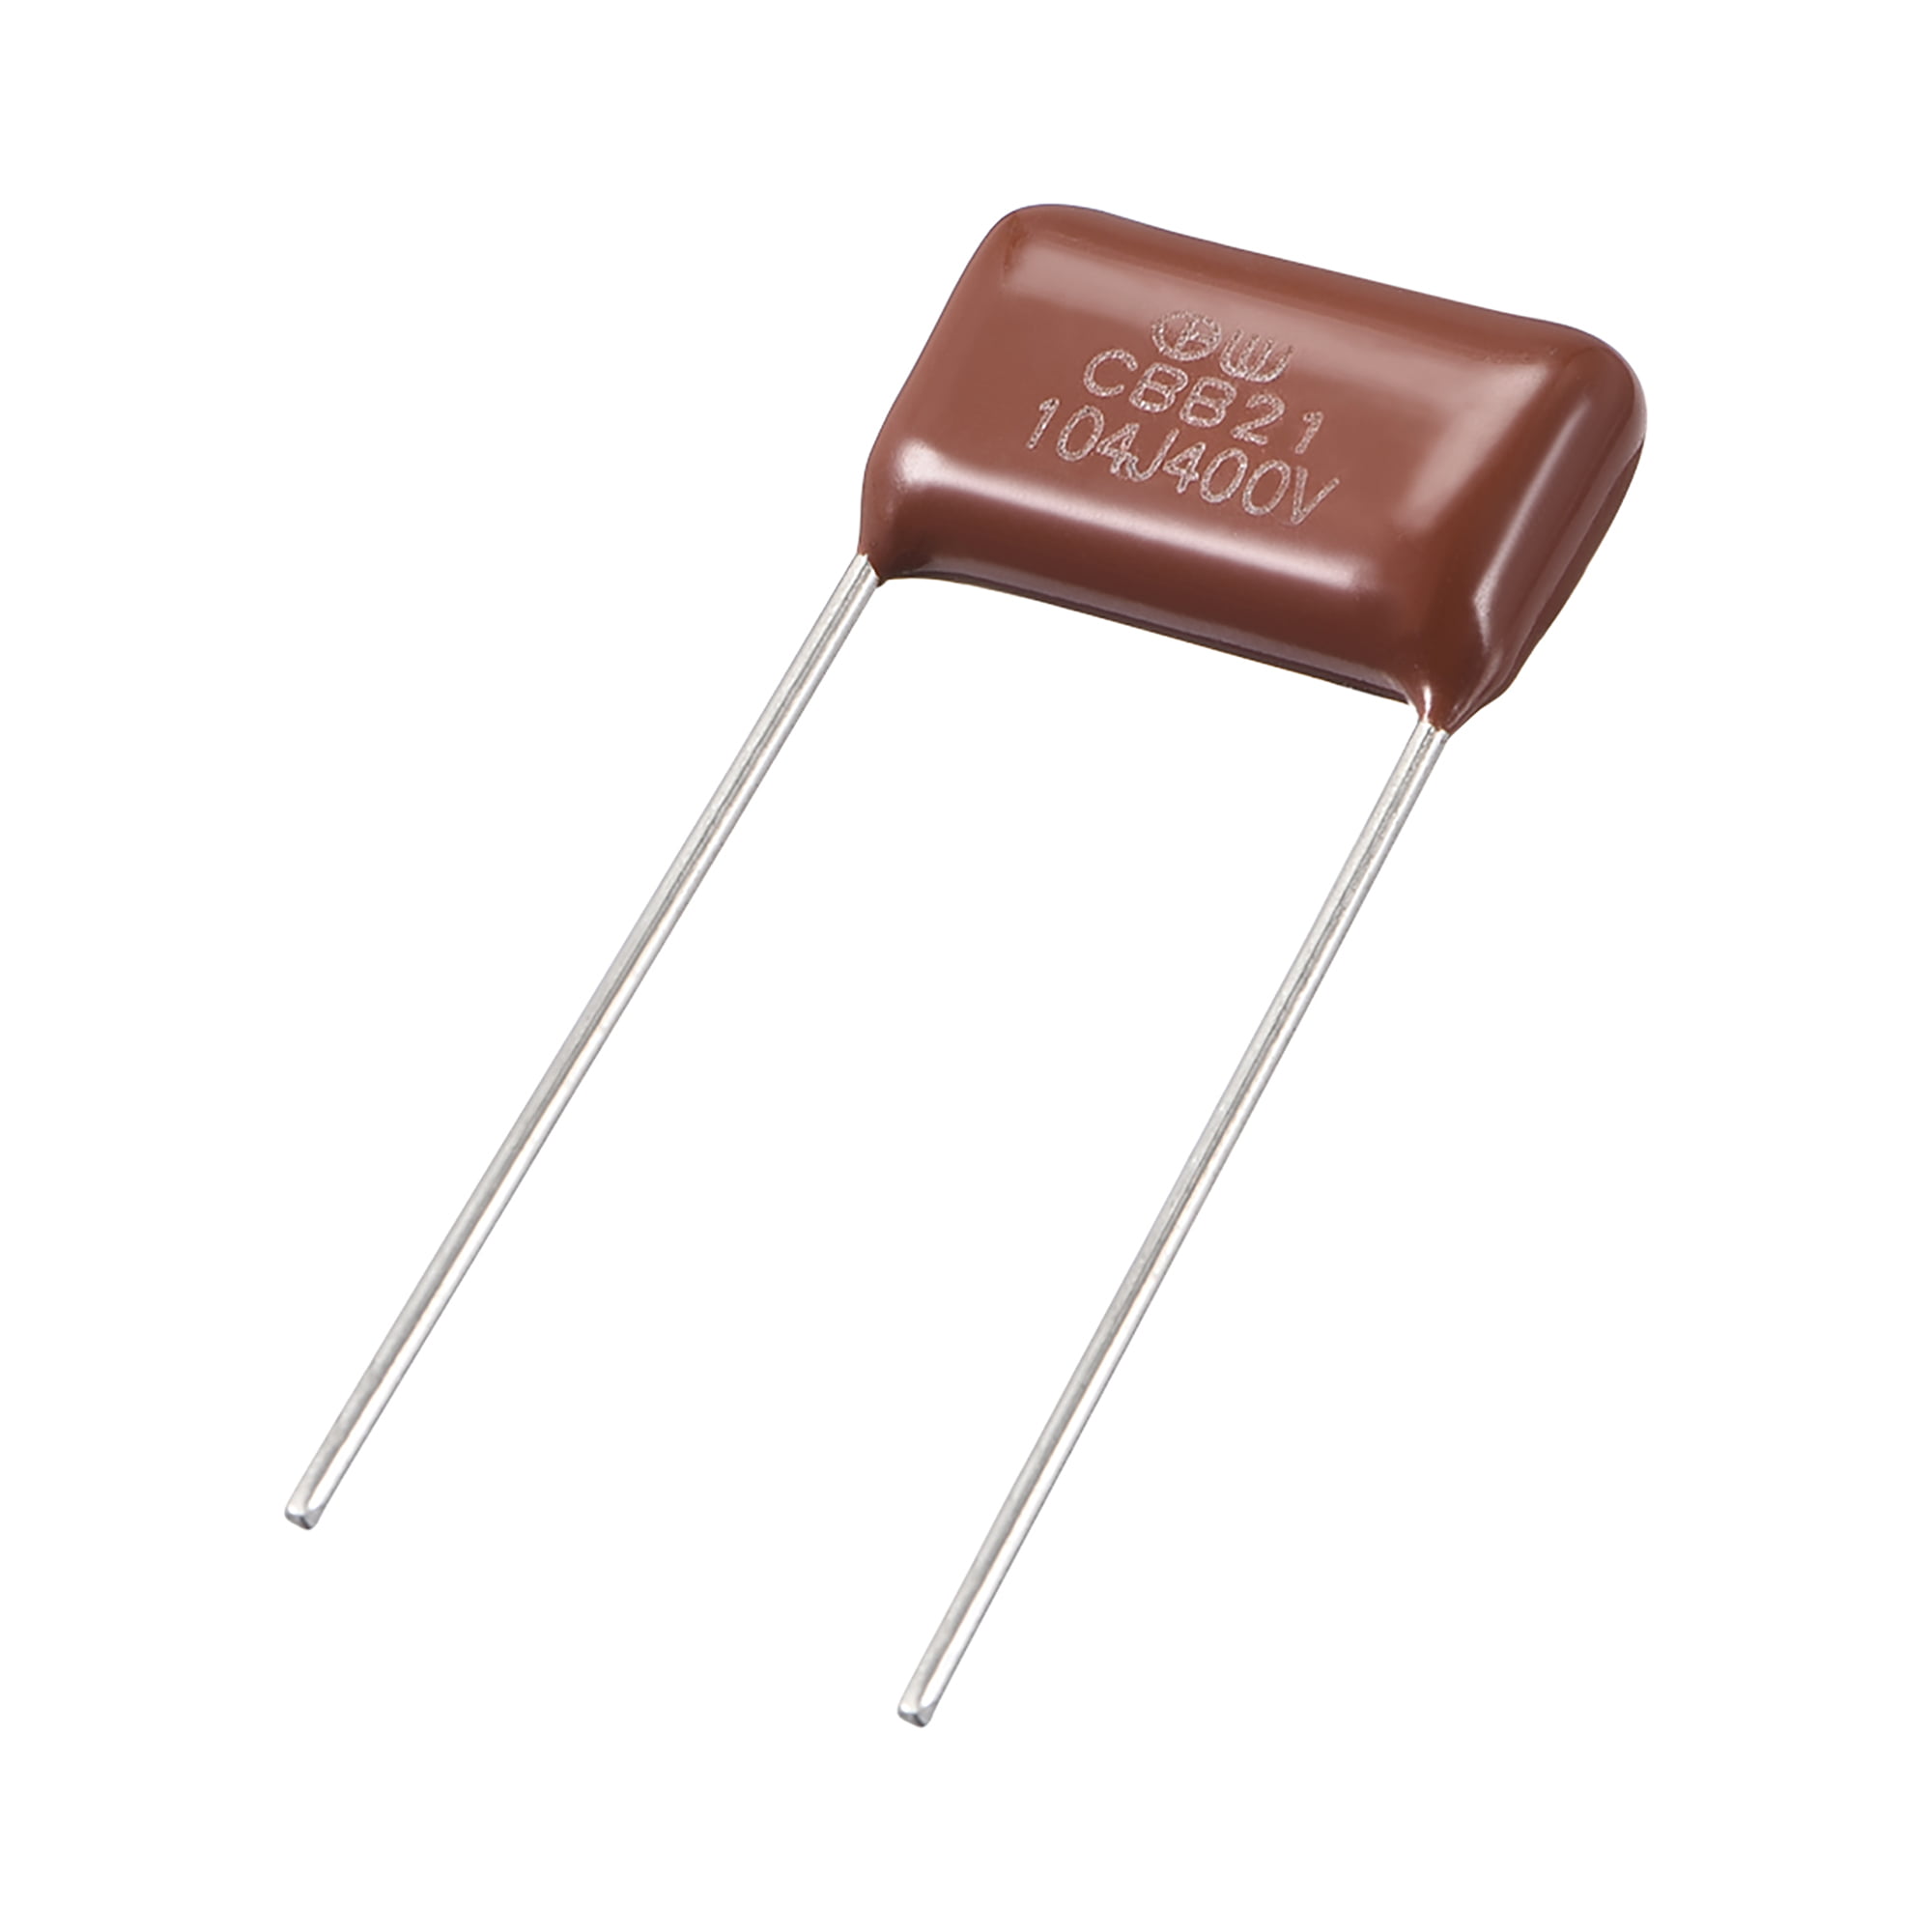 uxcell CBB21 Metallized Polypropylene Film Capacitors 450V 0.1uF for Electric Circuits Energy Saving Lamp 5pcs 